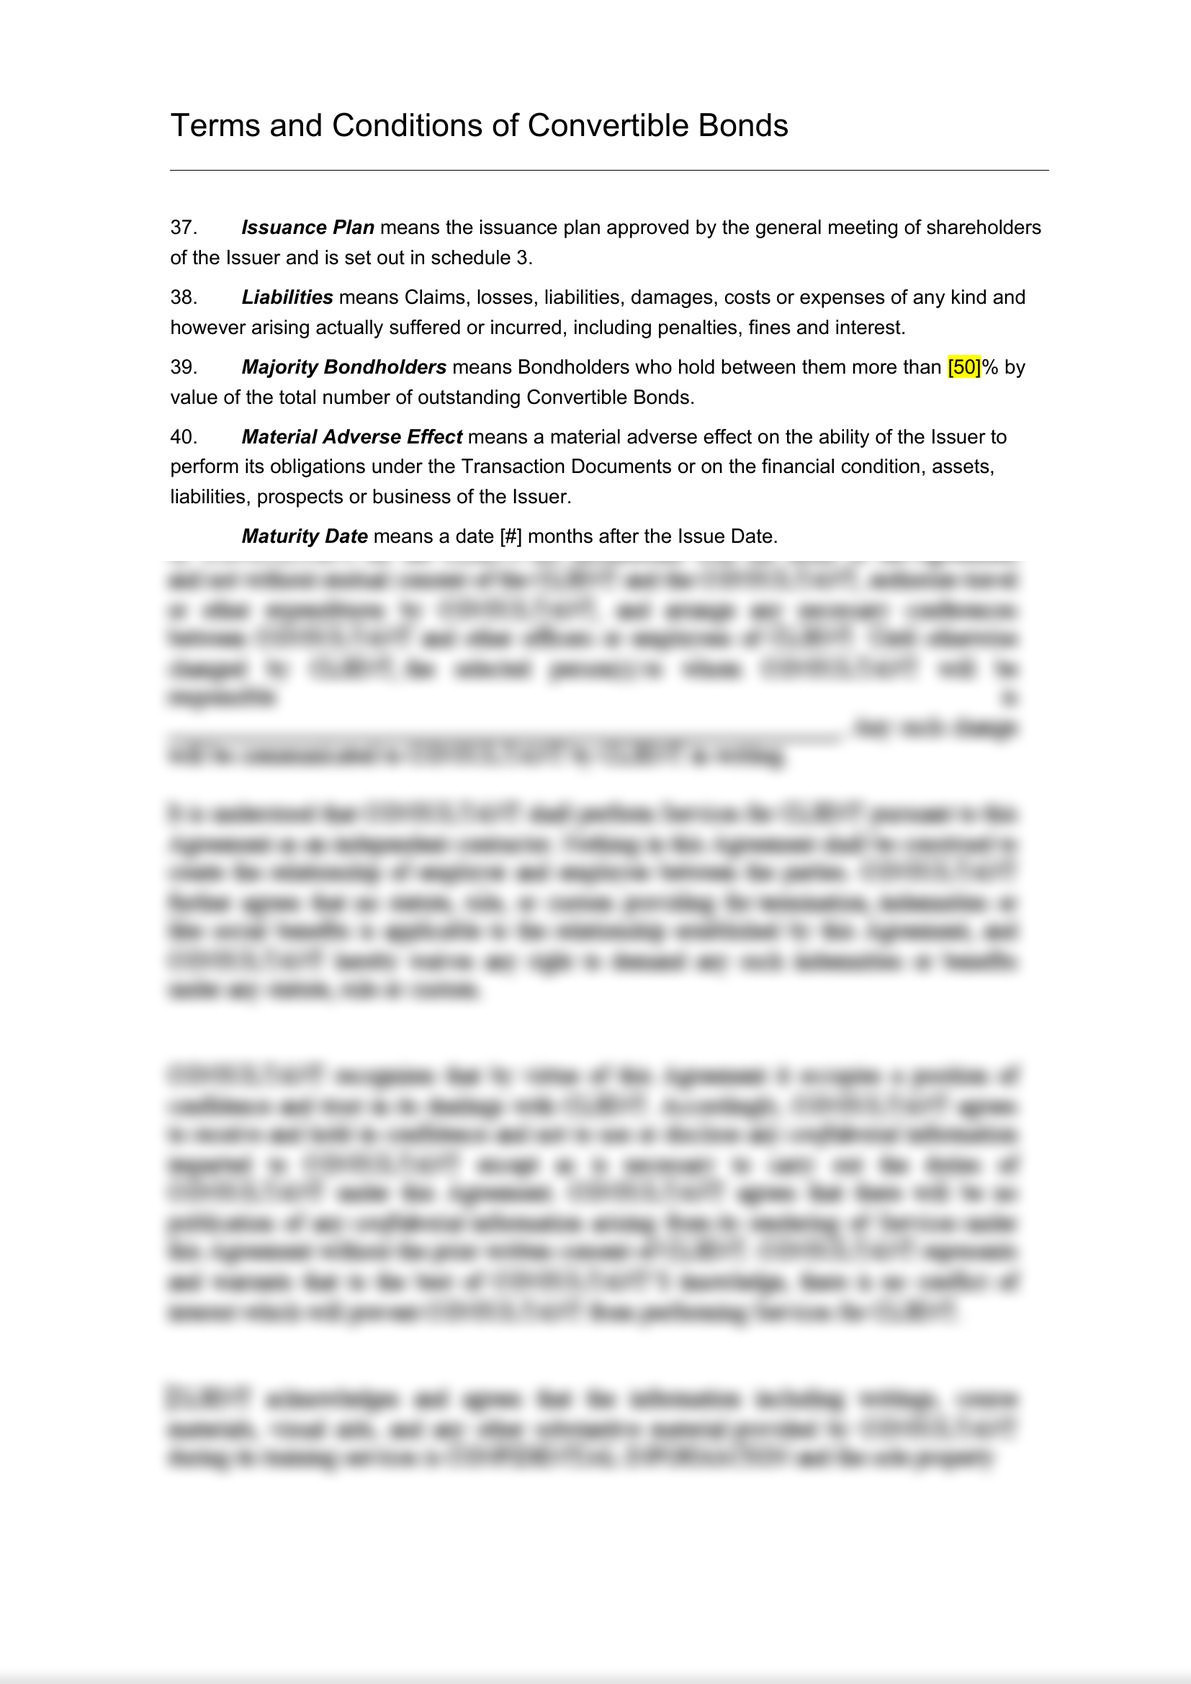 Terms and Conditions of Convertible Bonds-4